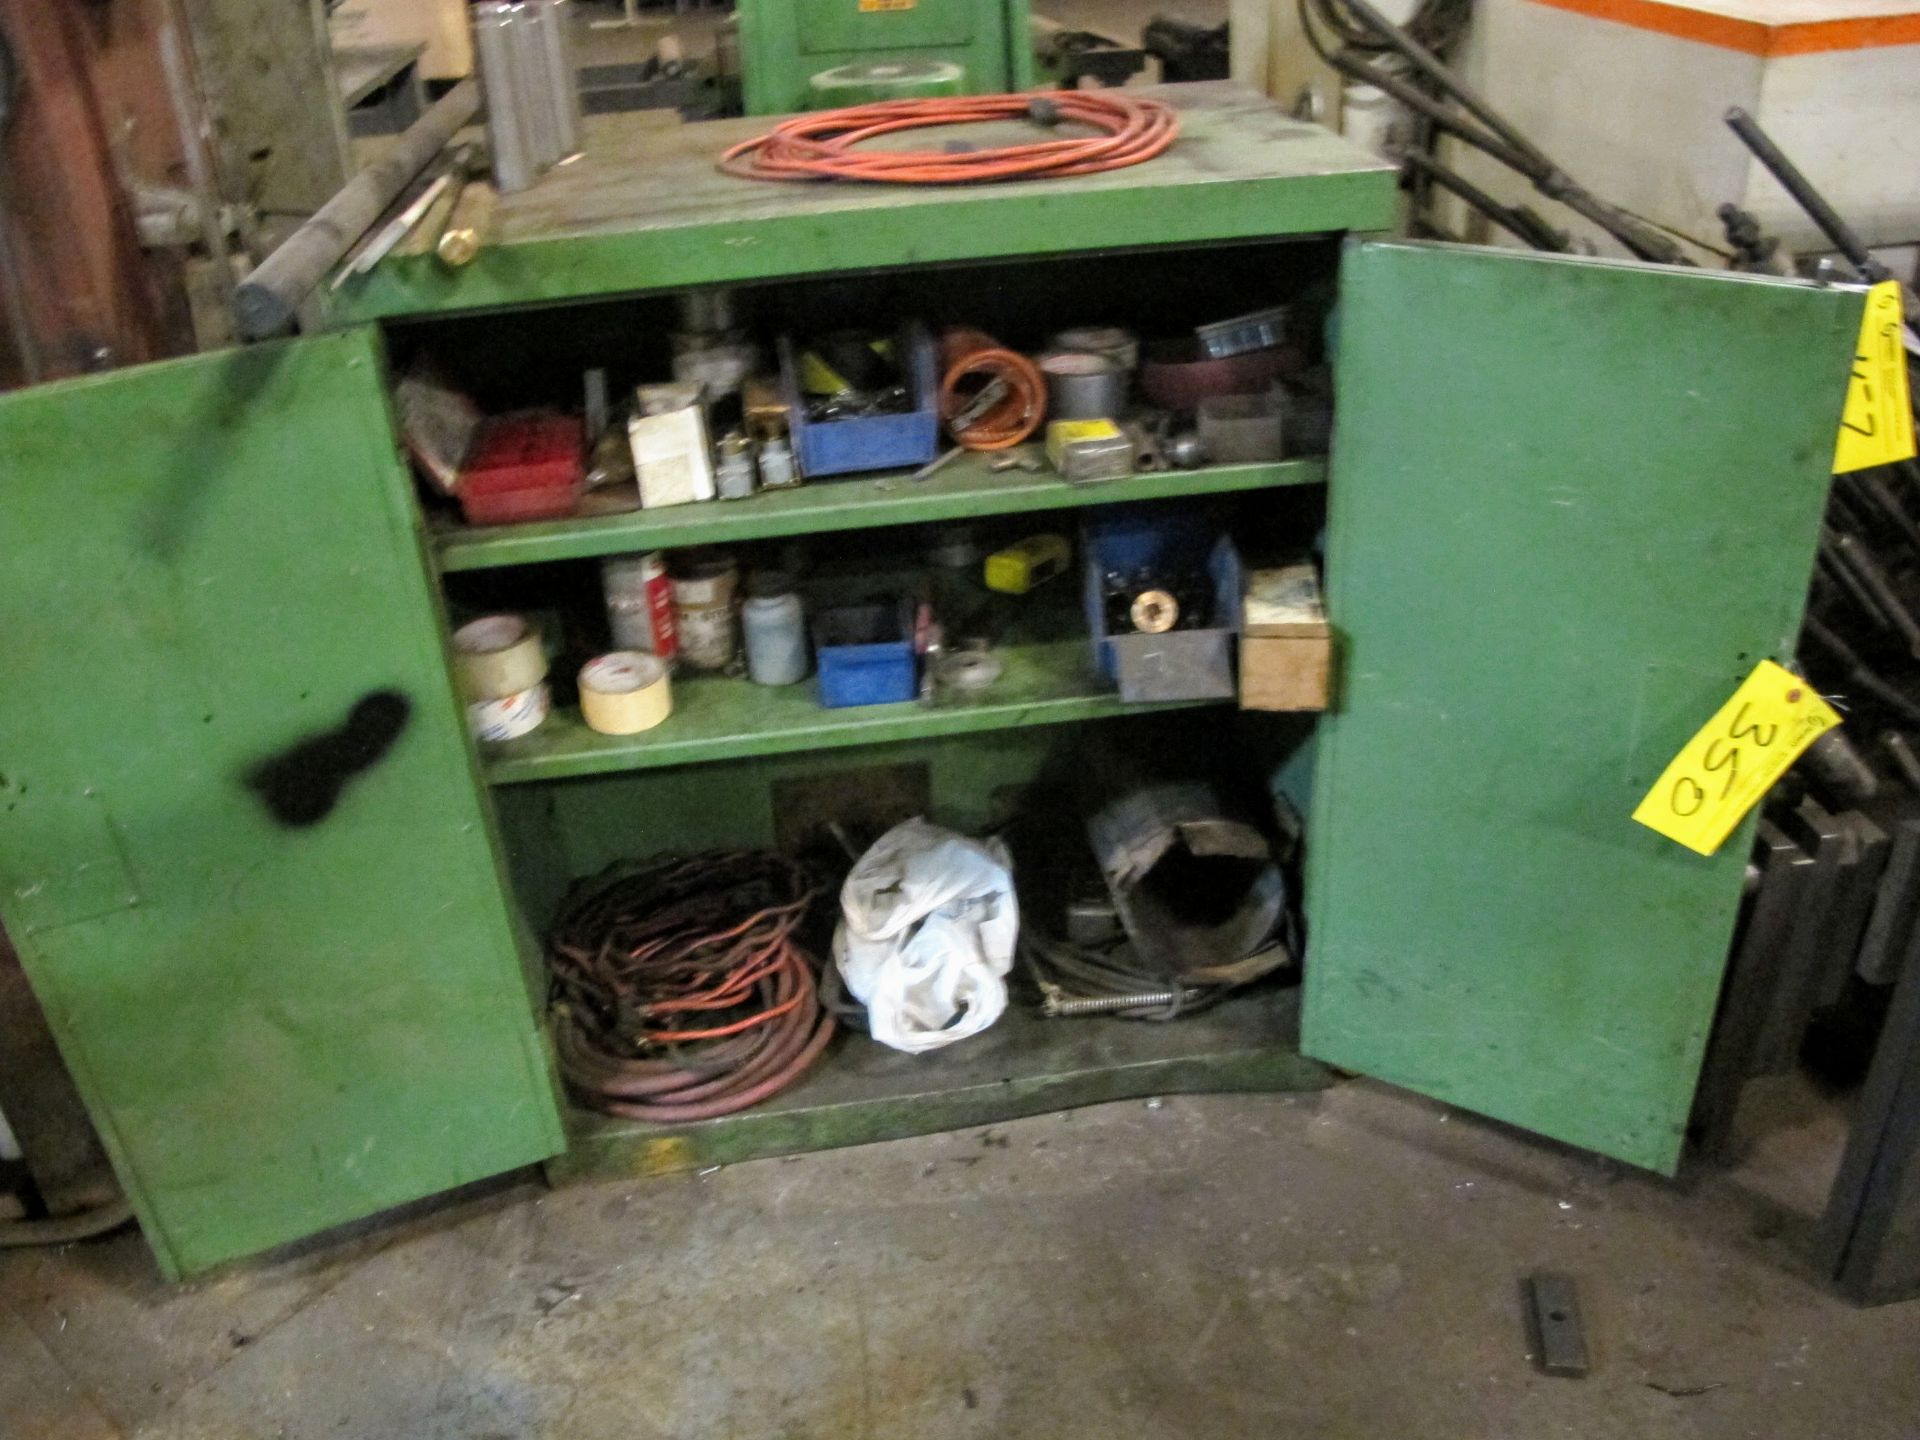 2 SECTION SHELVING UNIT W/CONTENTS AND 2 DOOR METAL CABINET W/CONTENTS - Image 2 of 2